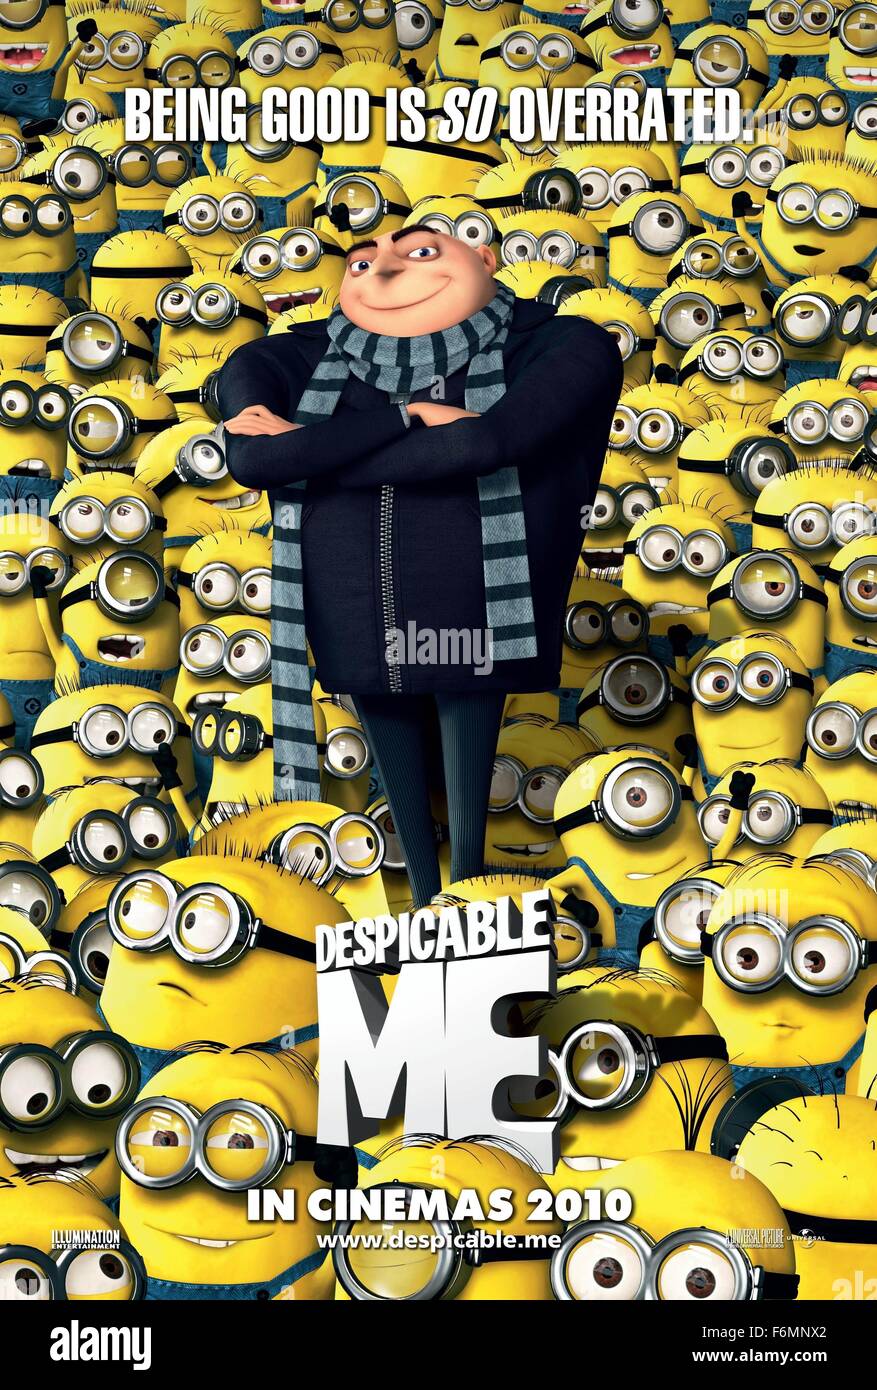 RELEASE DATE: 9 July 2010. TITLE: Despicable Me. STUDIO: Universal Studios.  PLOT: A trio of orphan